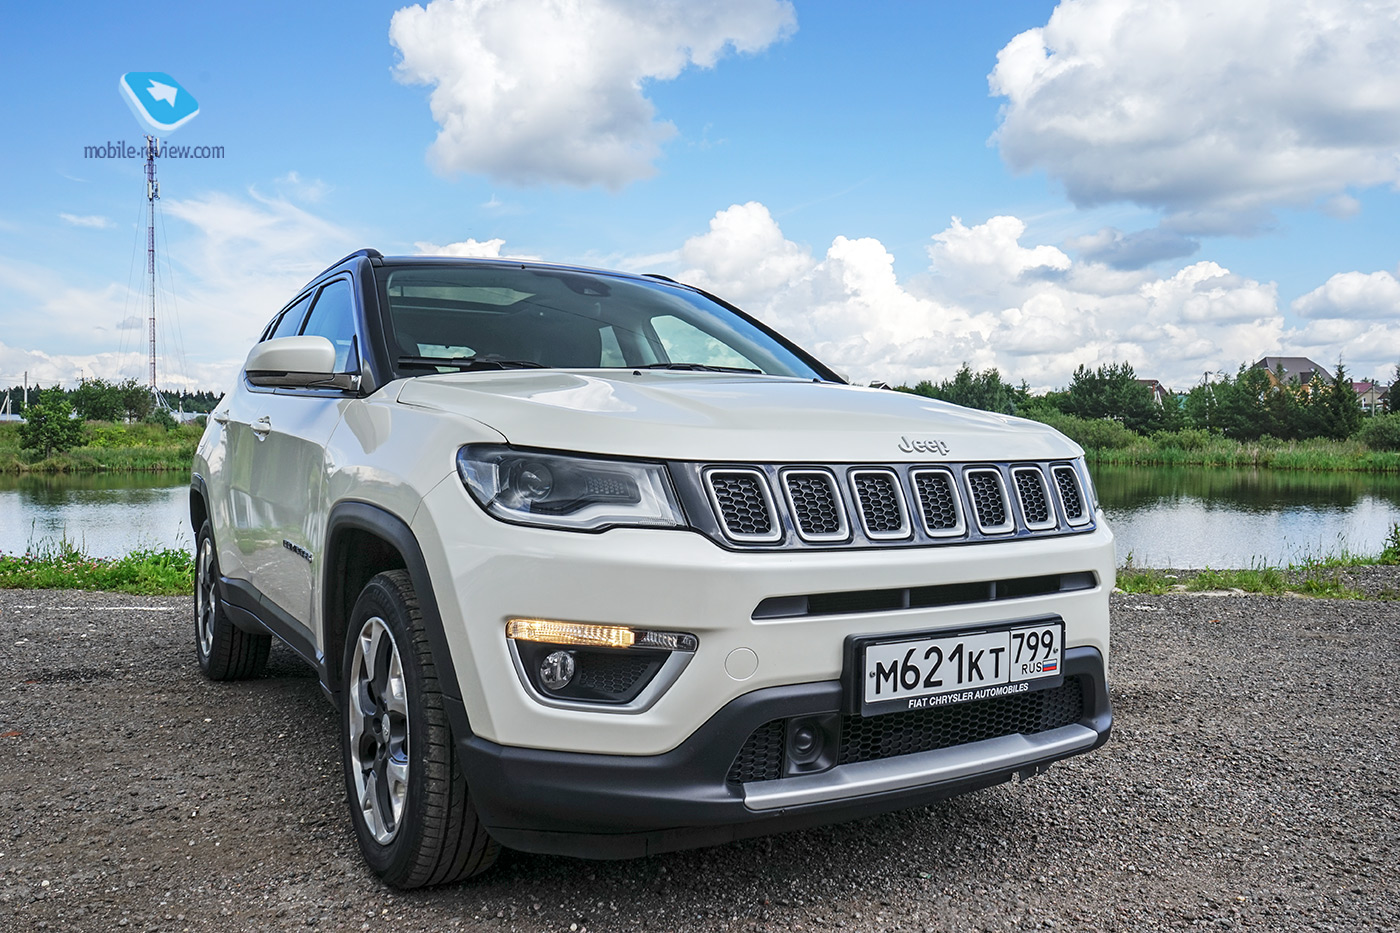 Jeep Compass test. American crossover